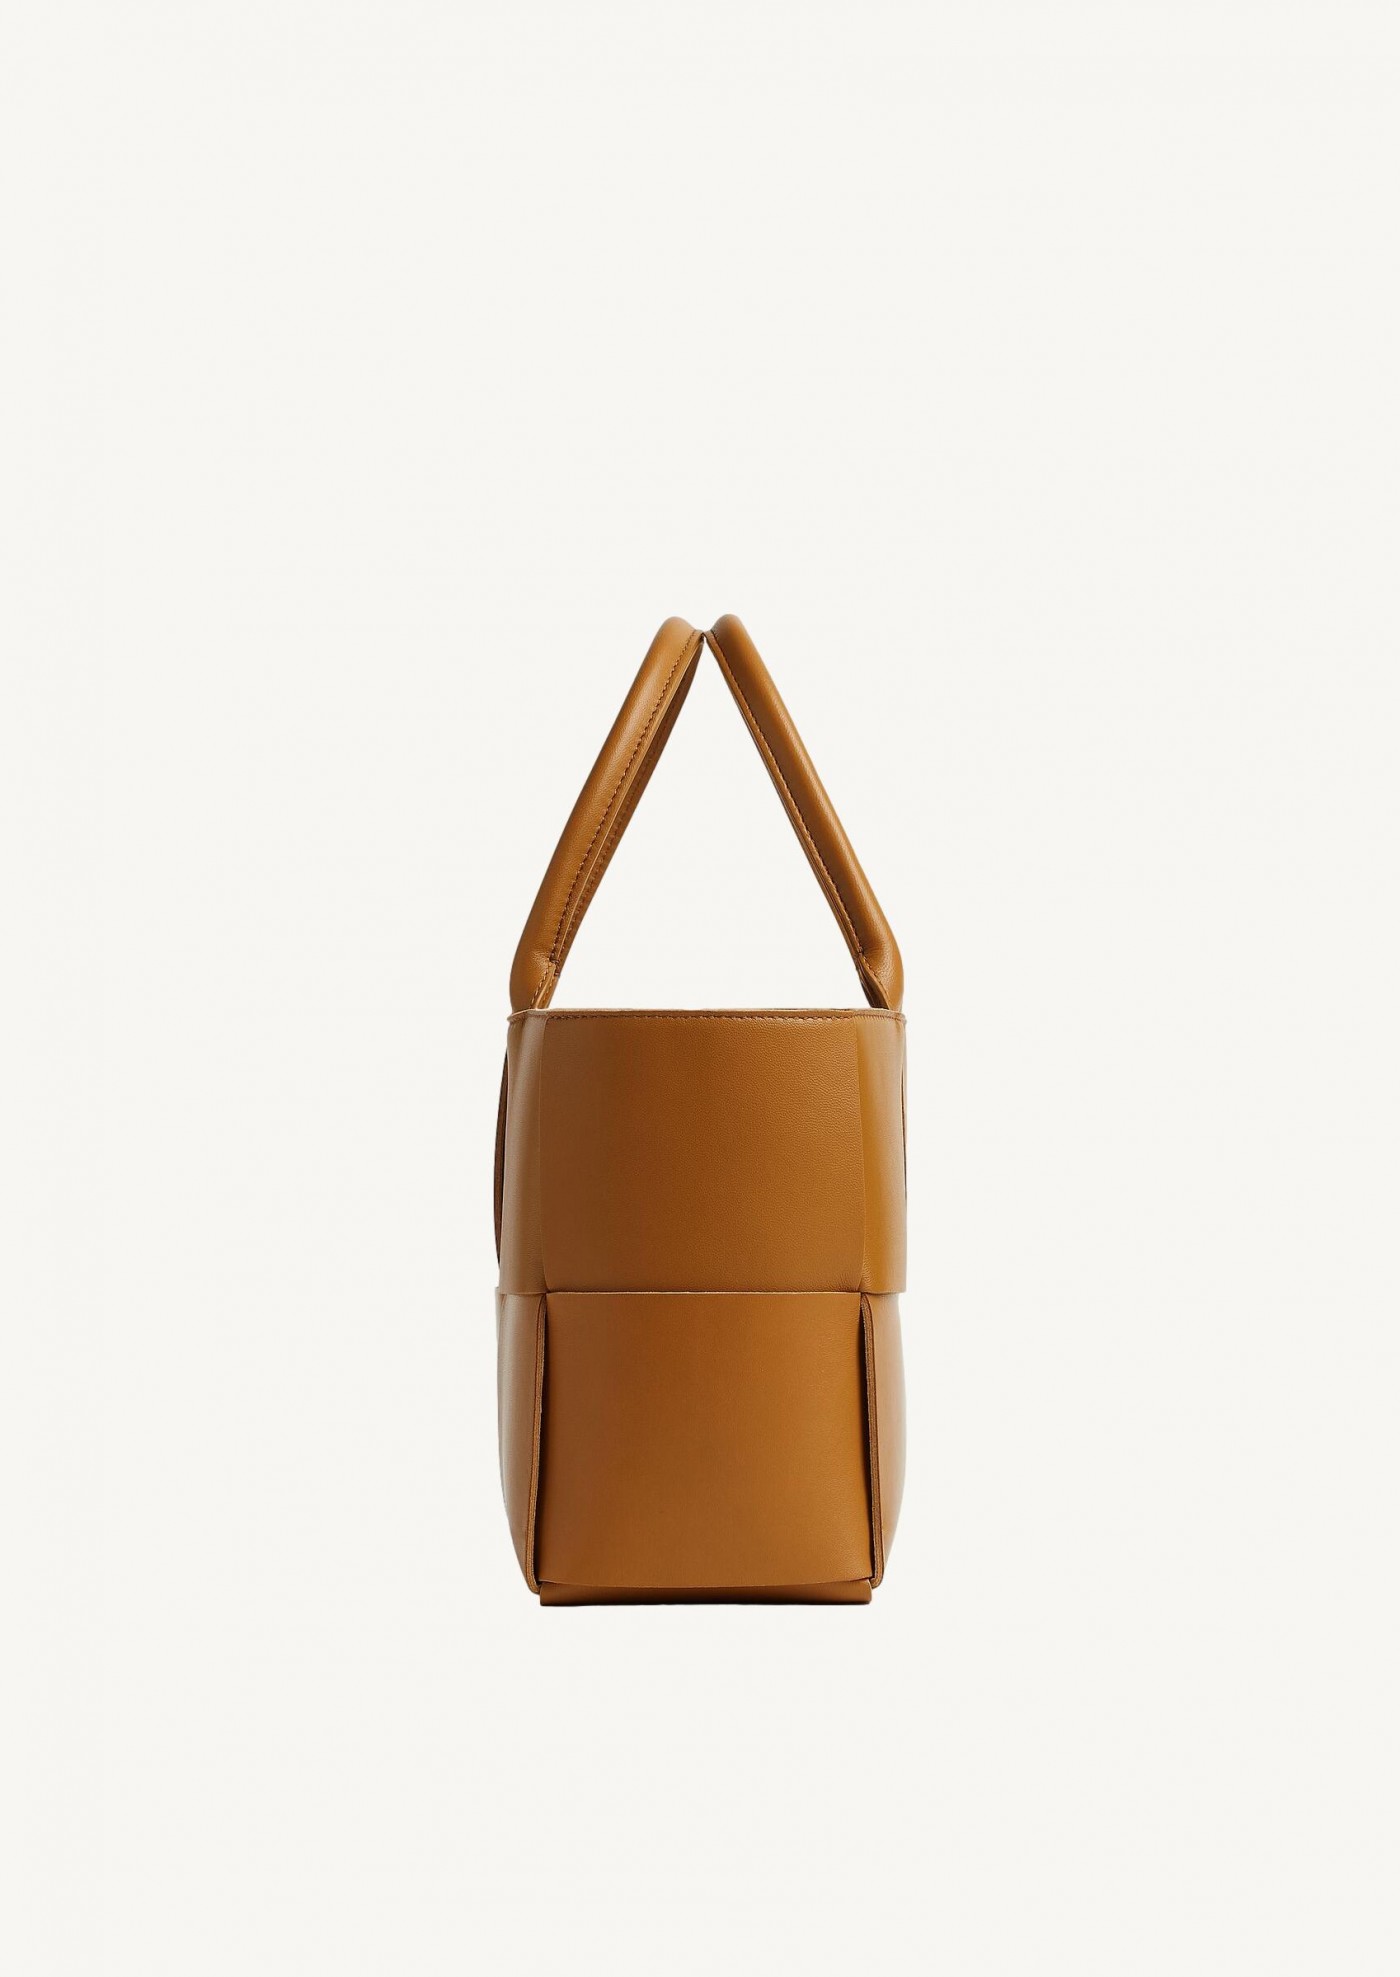 Small Arco Tote in camel